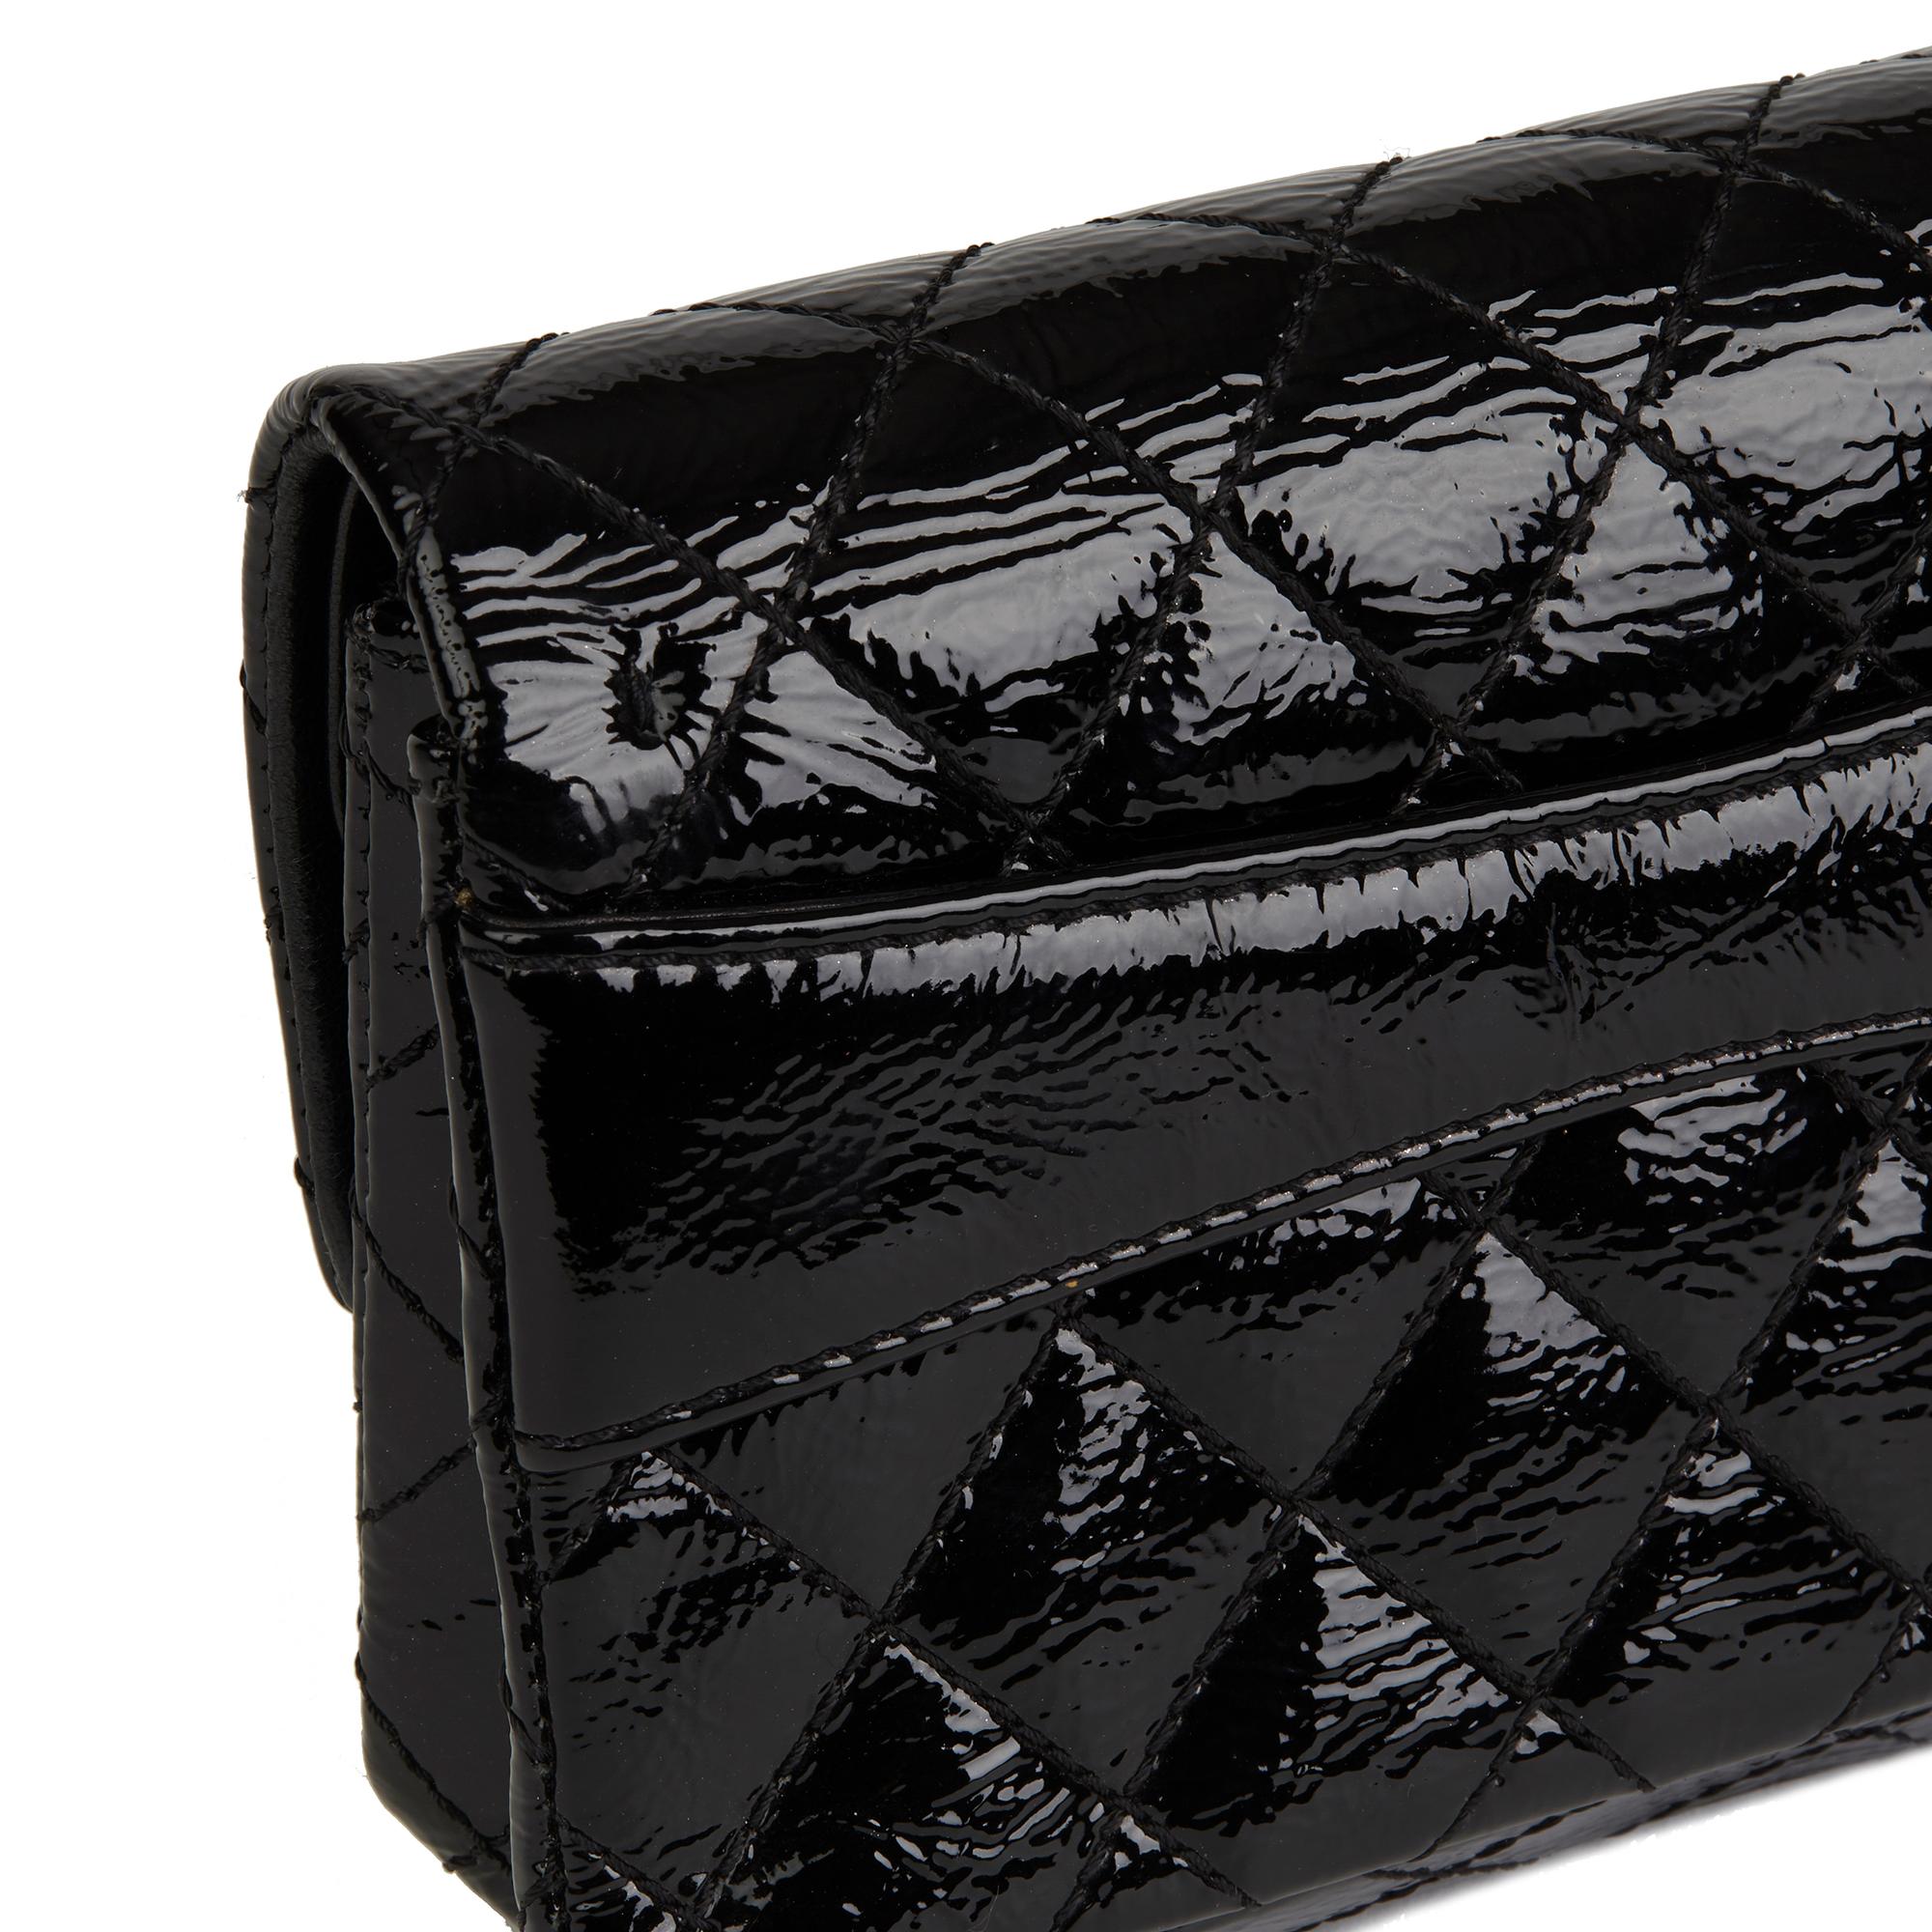 2007 Chanel Black Quilted Aged Patent Leather 2.55 Reissue Clutch 3